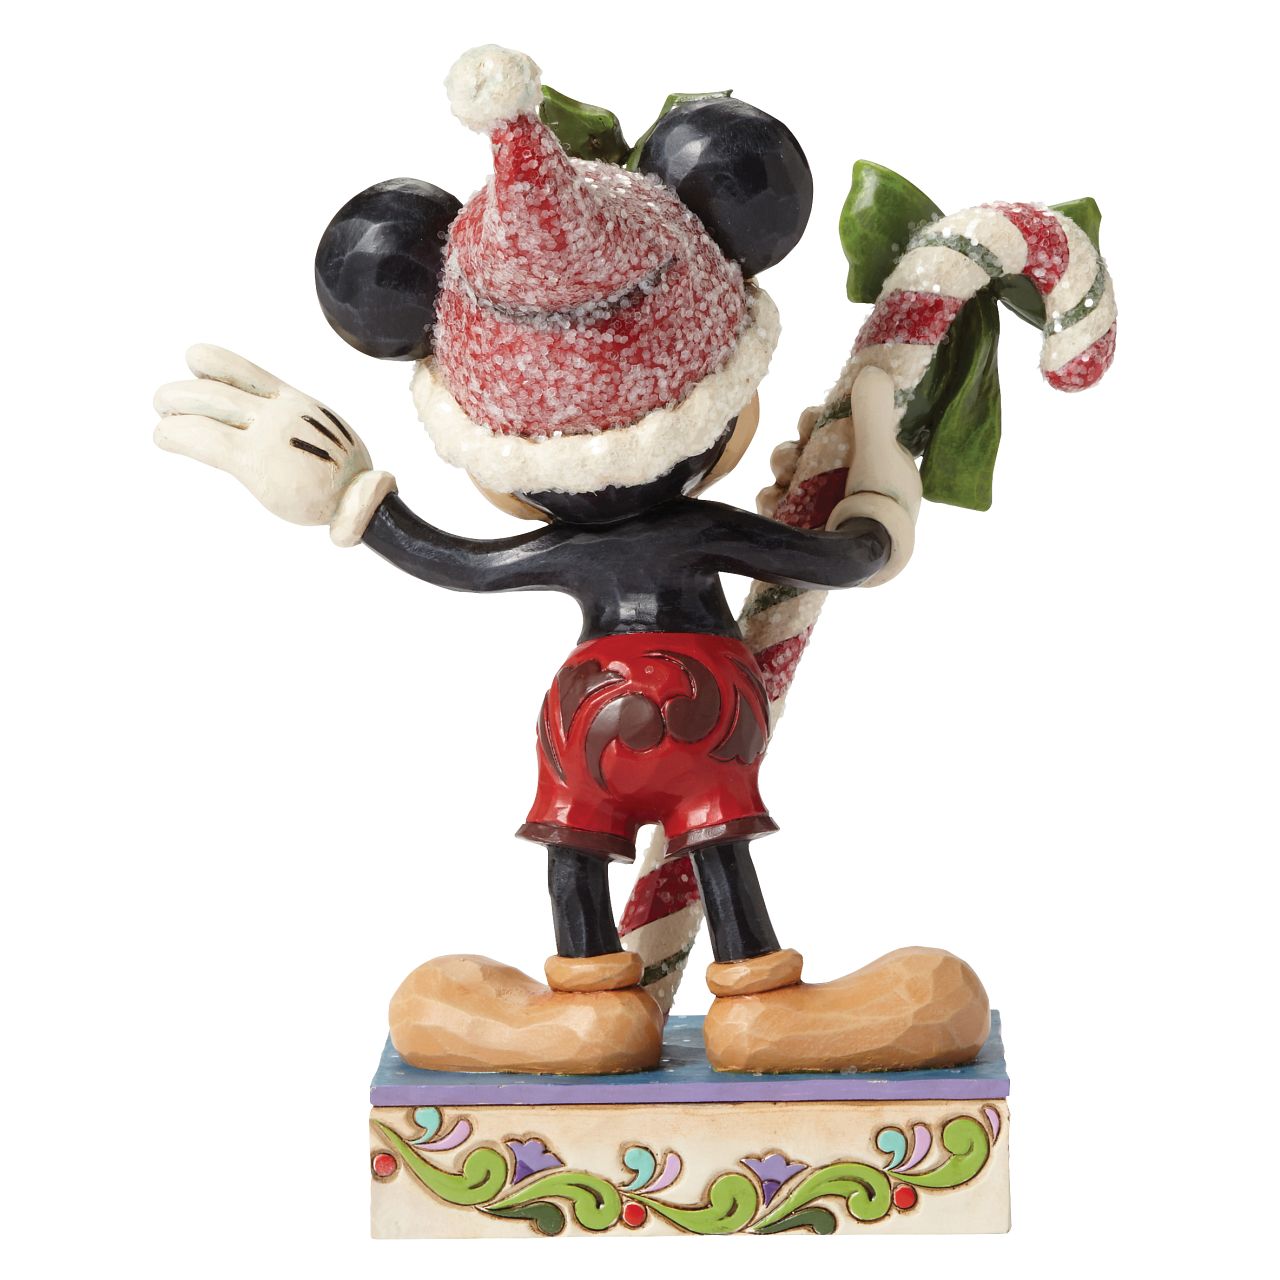 Disney Mickey Mouse Candy Cane Figurine  "Sweet Greetings" A jolly Mickey Mouse brings a gift of sugar coated candy in this delightful Christmas design from the artistry of Jim Shore. Beautifully handcrafted, this eye-catching piece features the classic Disney character decorated in Jim's unique folk art style.